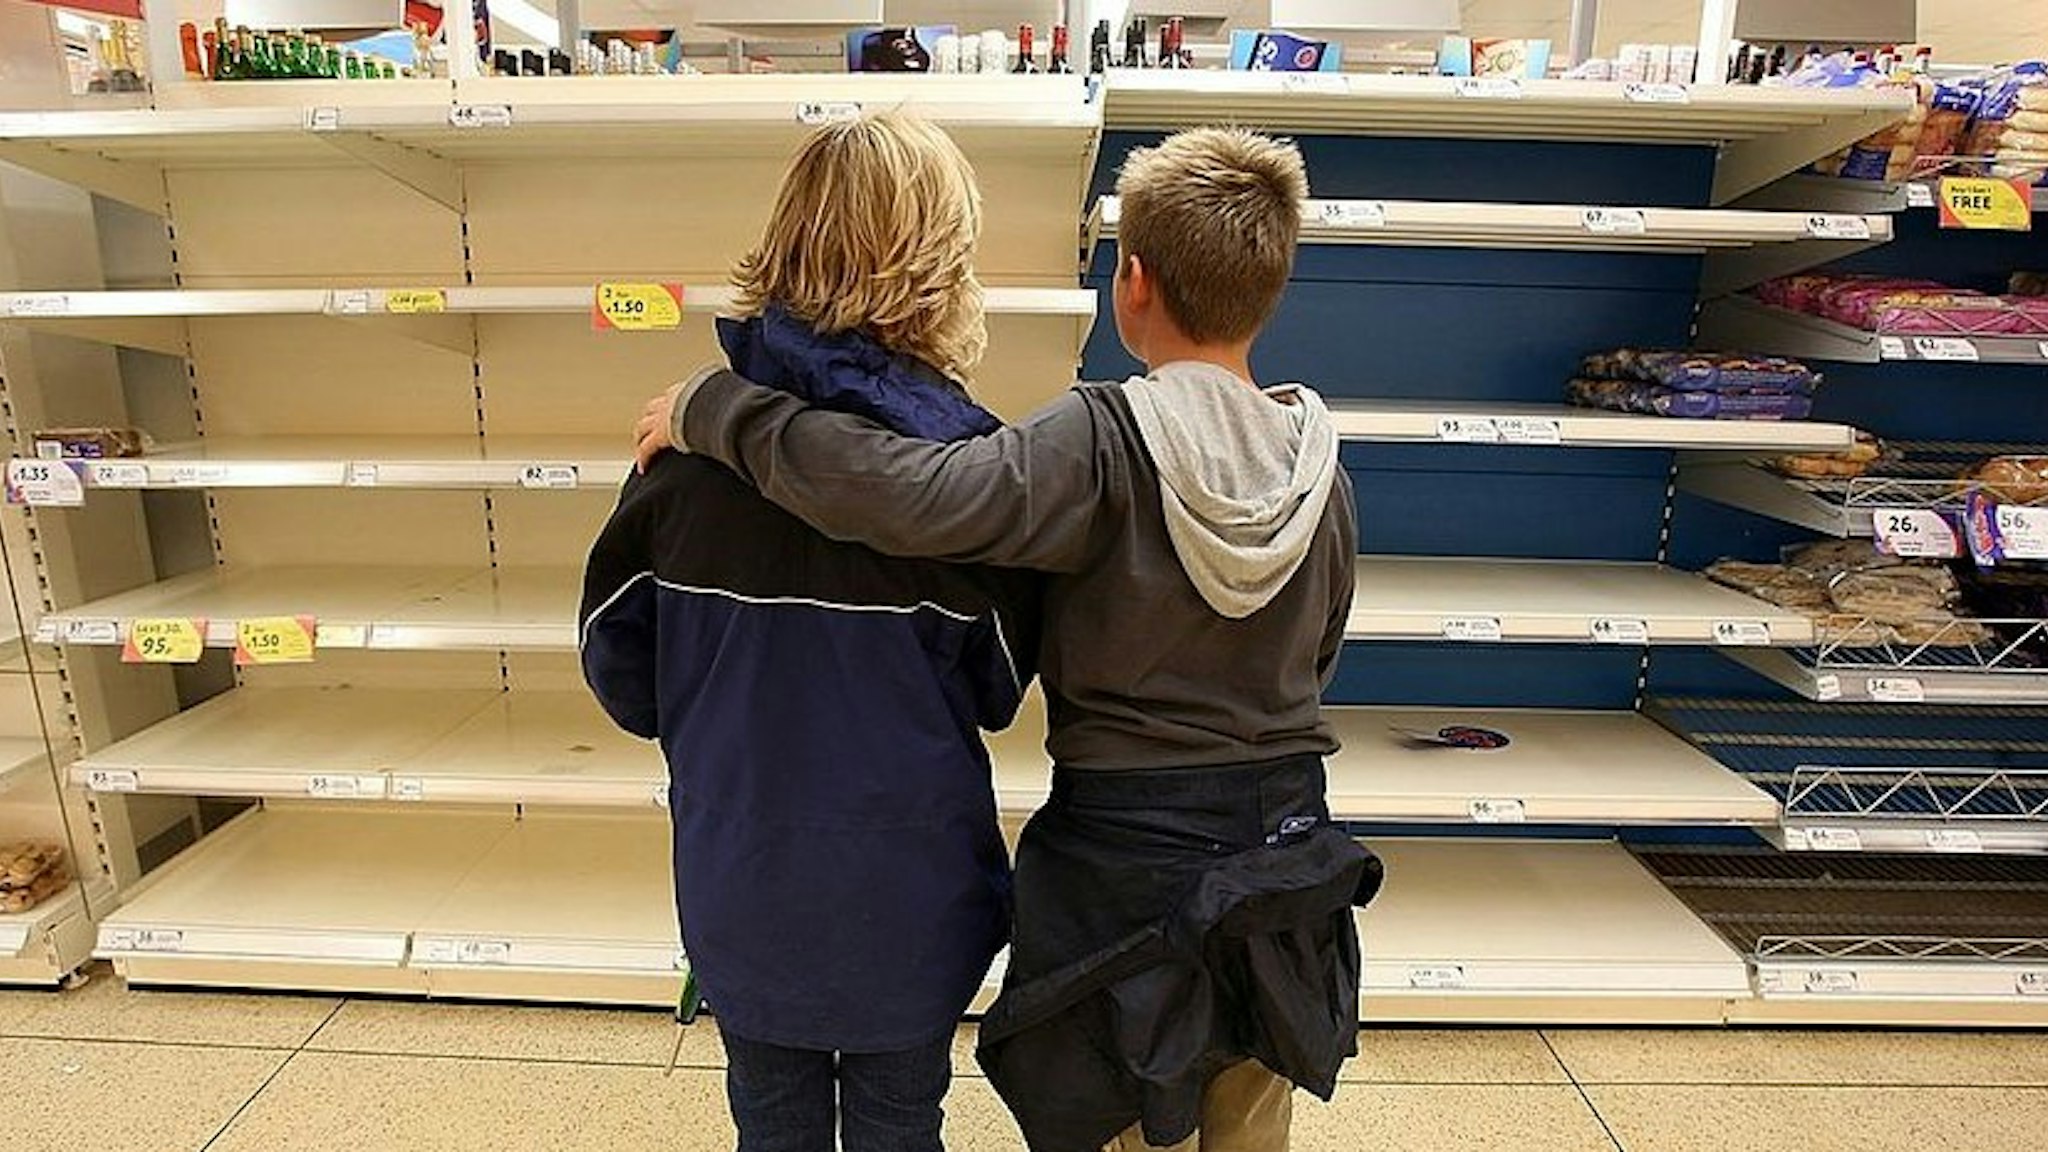 A mother and her son look at the empty bakery shelves in a supermarket on July 23 2007